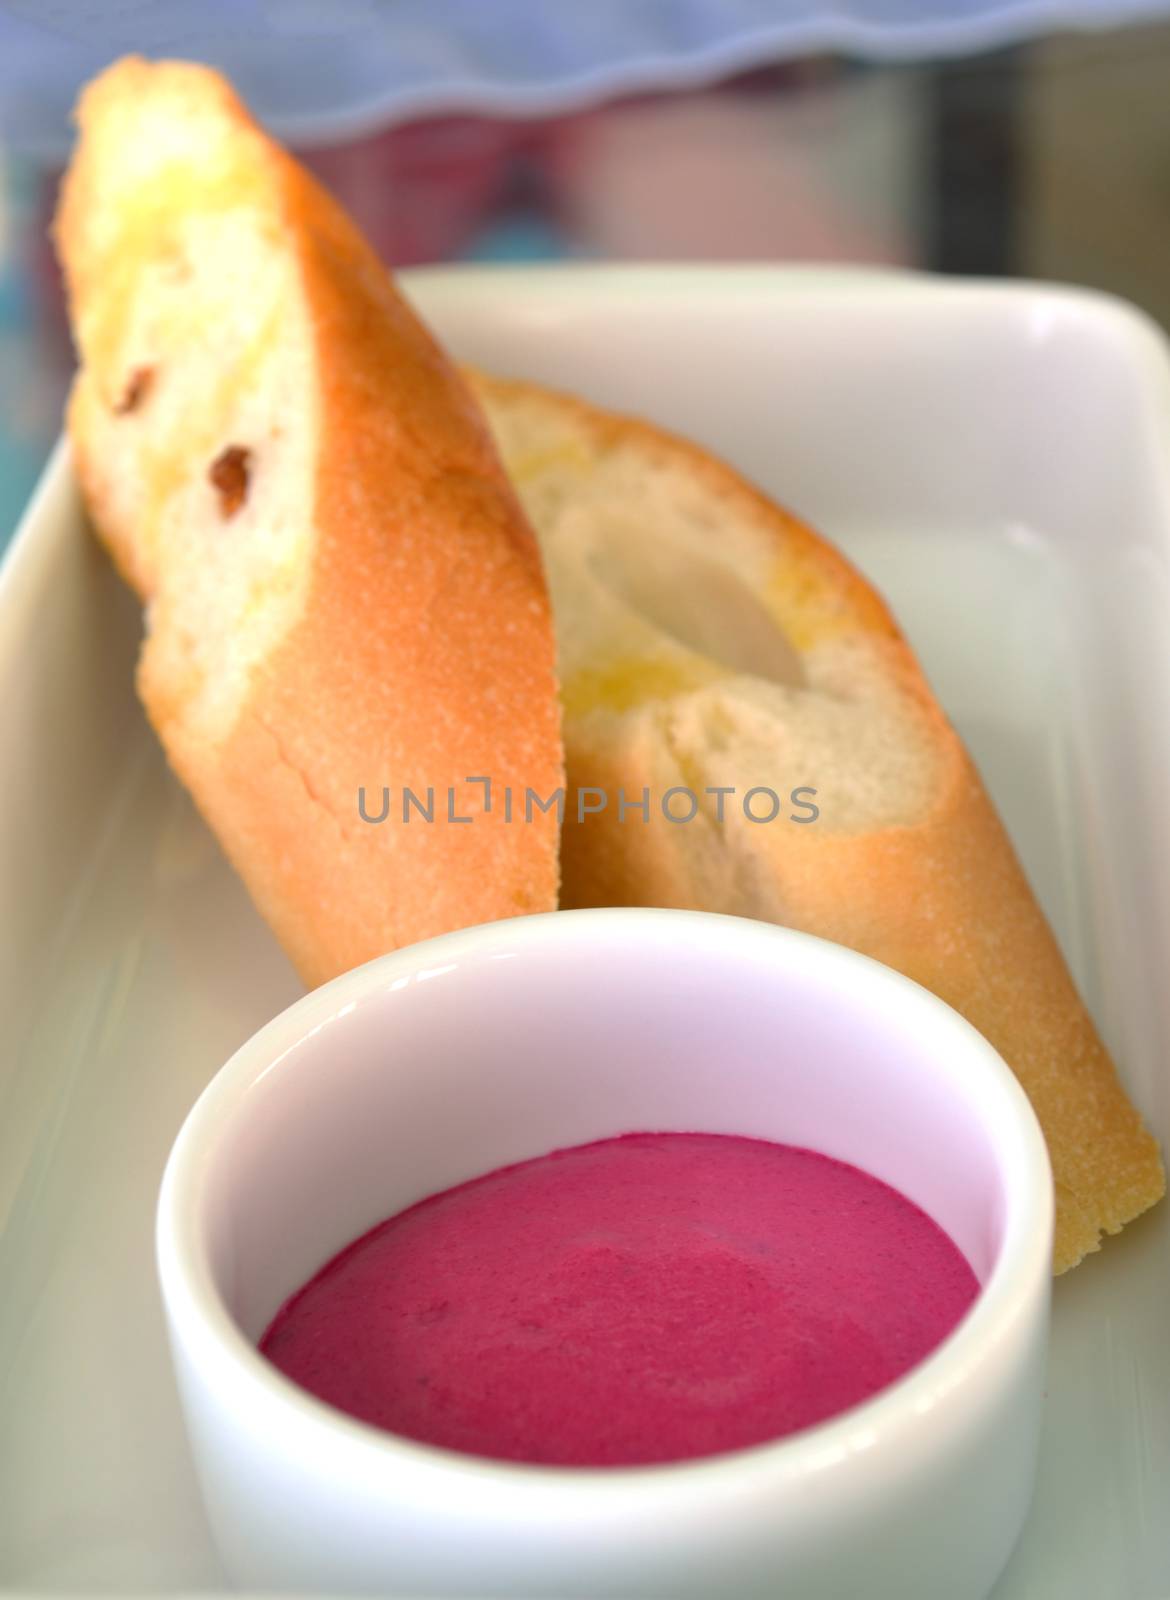 homemade pink jam with bread; breakfast meal by gypsygraphy